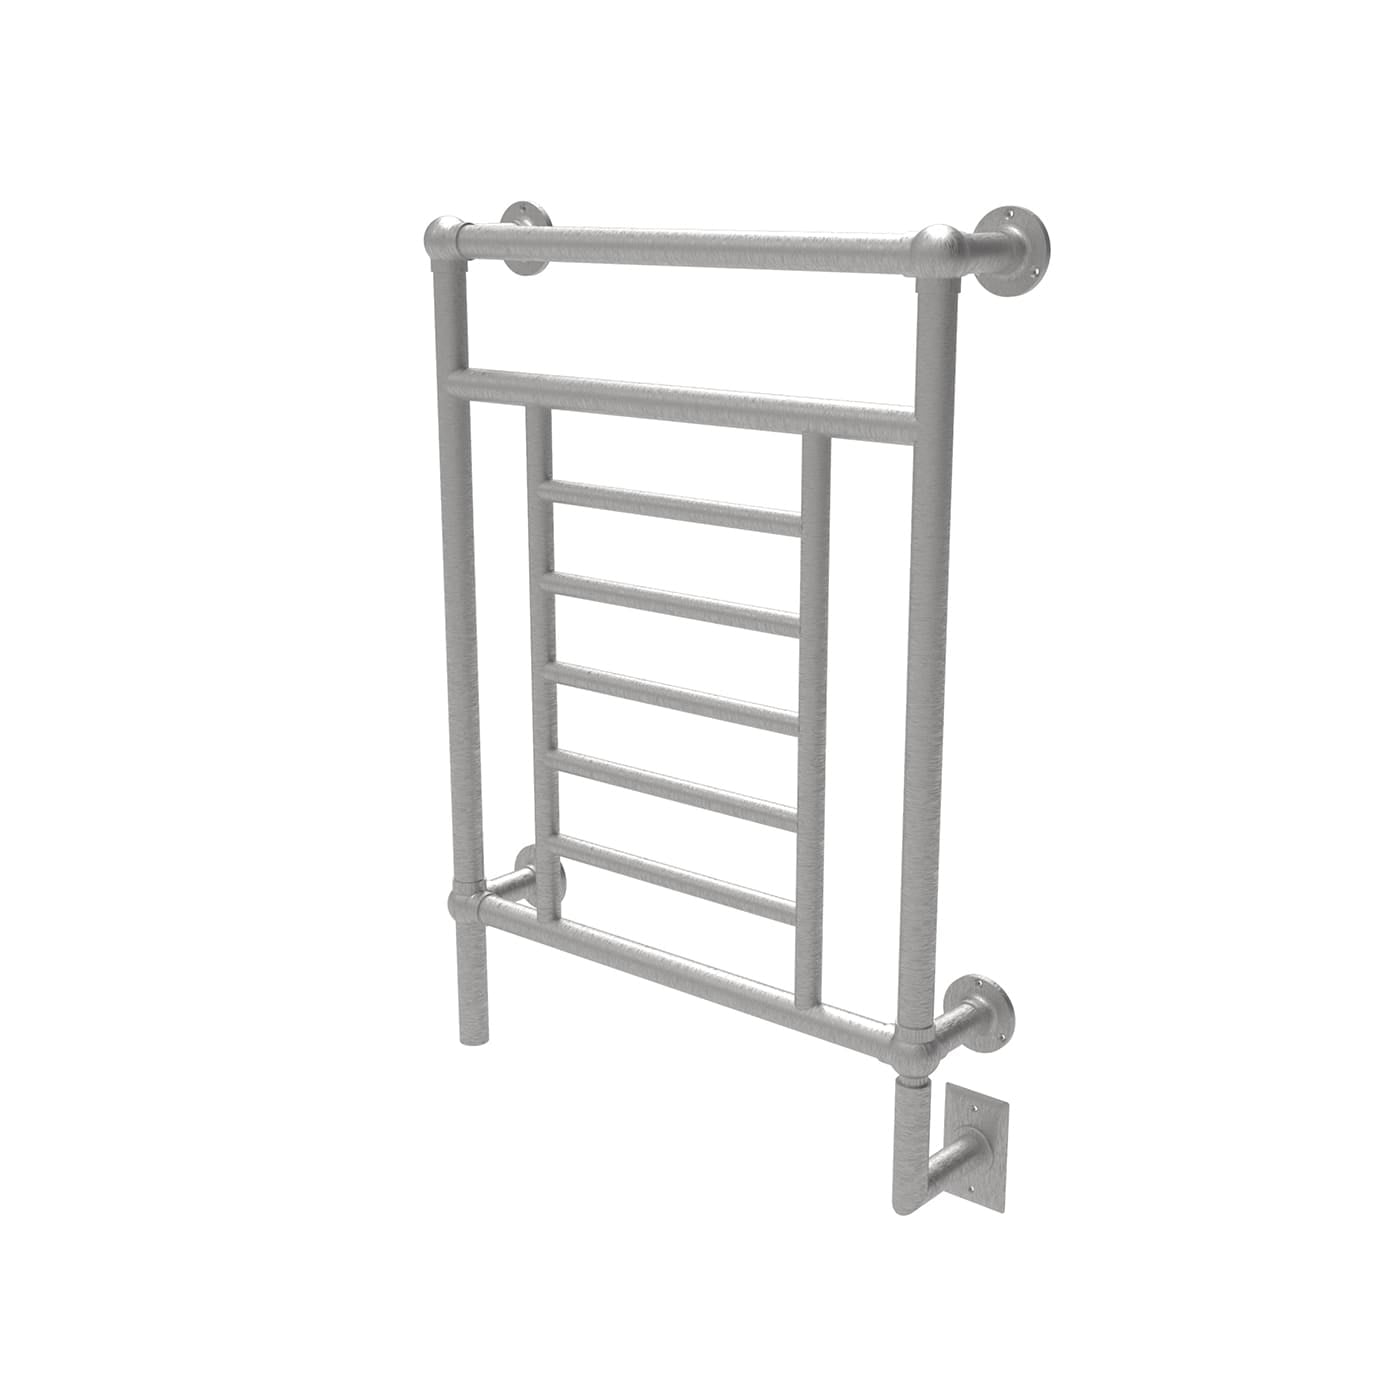 Picture of Amba T-2536BN 43.13 x 21 x 5.37 in. Towel Warmer - Brushed Nickel